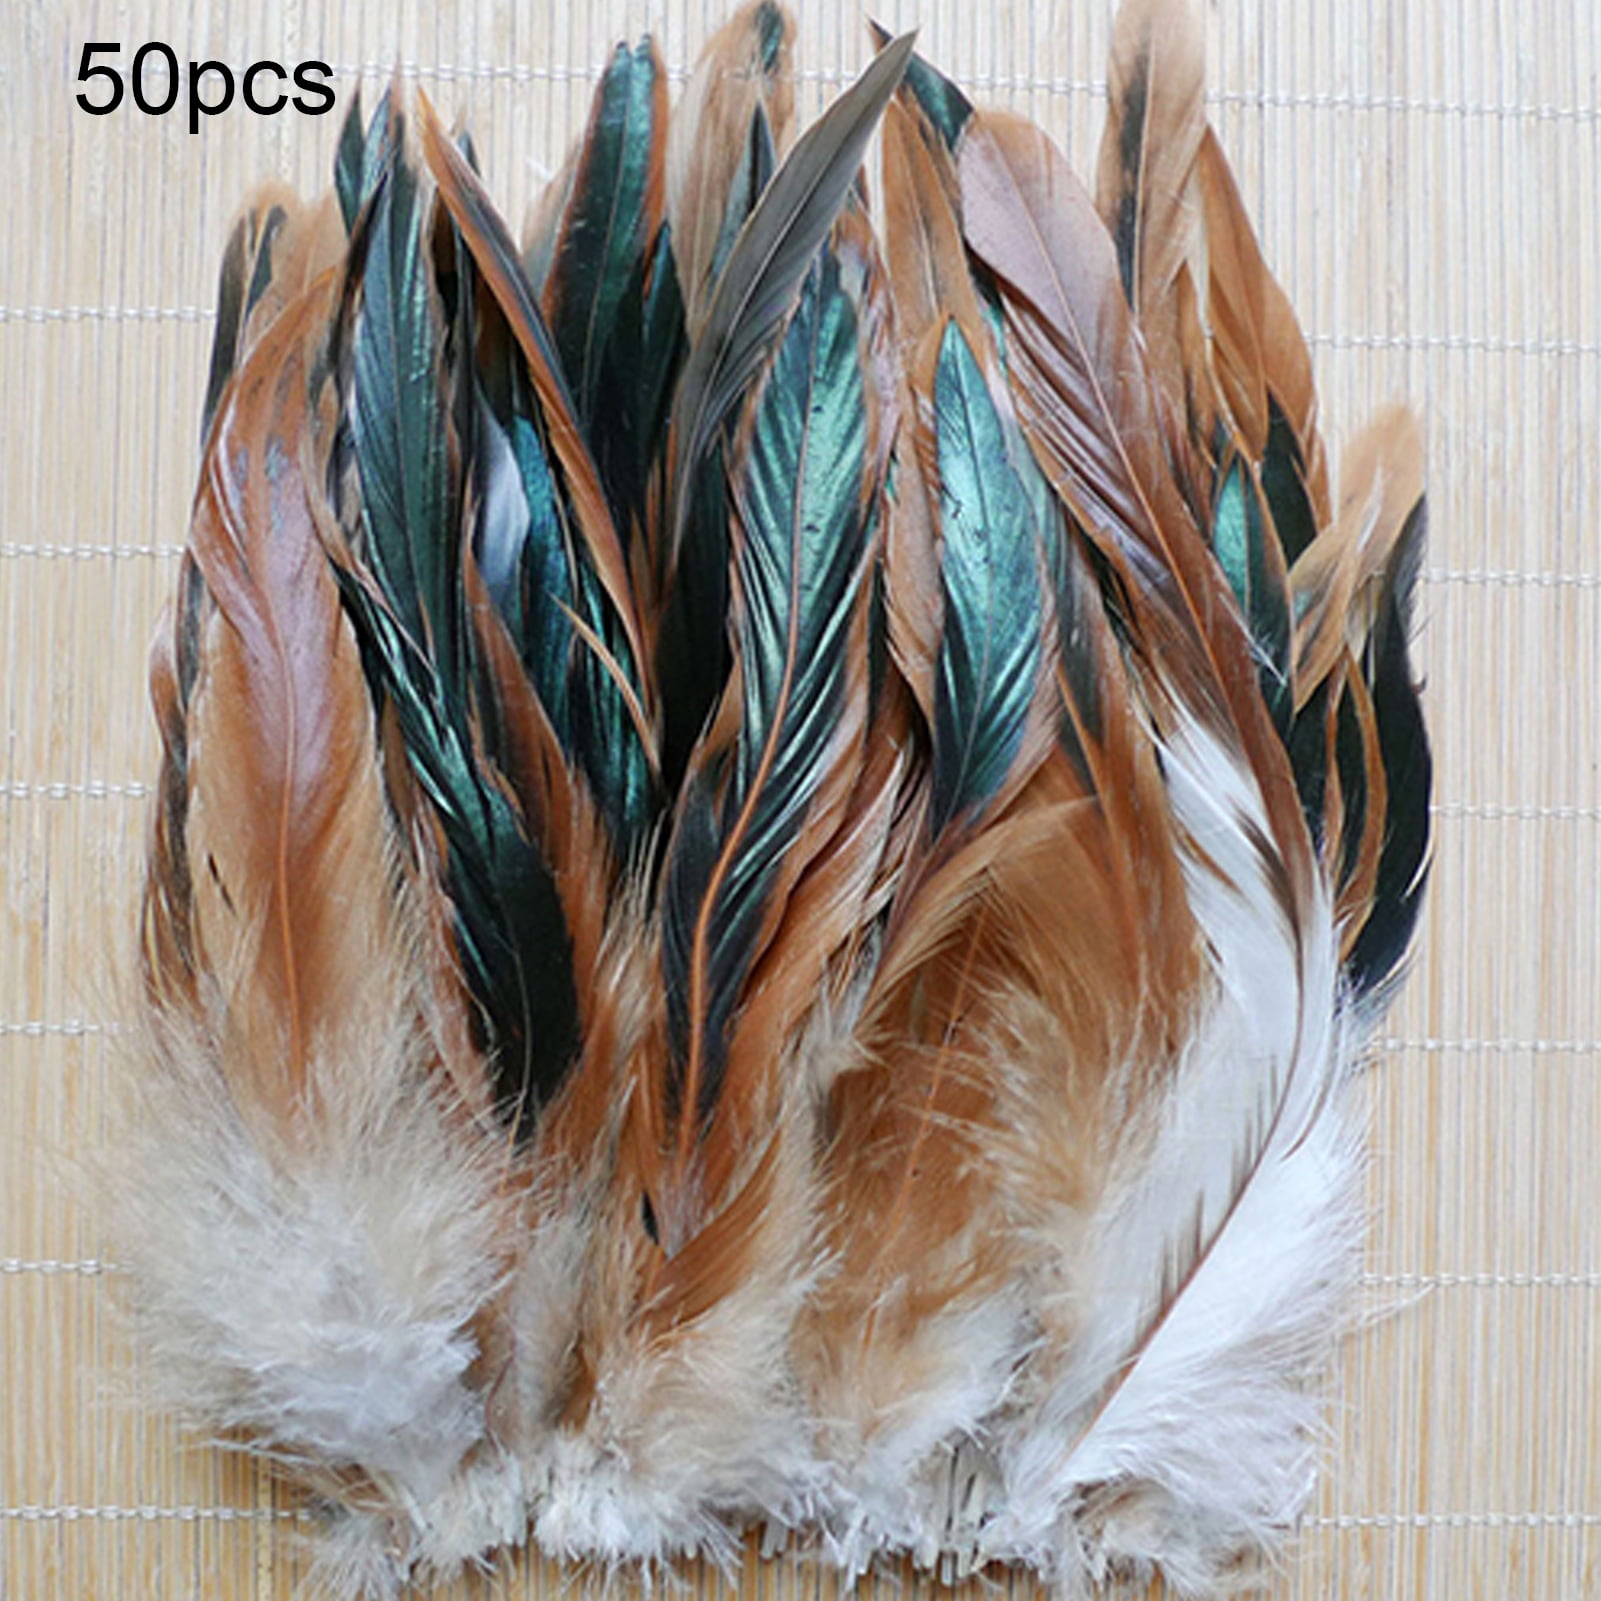 Bulk Rooster Feathers Natural Craft Feathers 50PCS